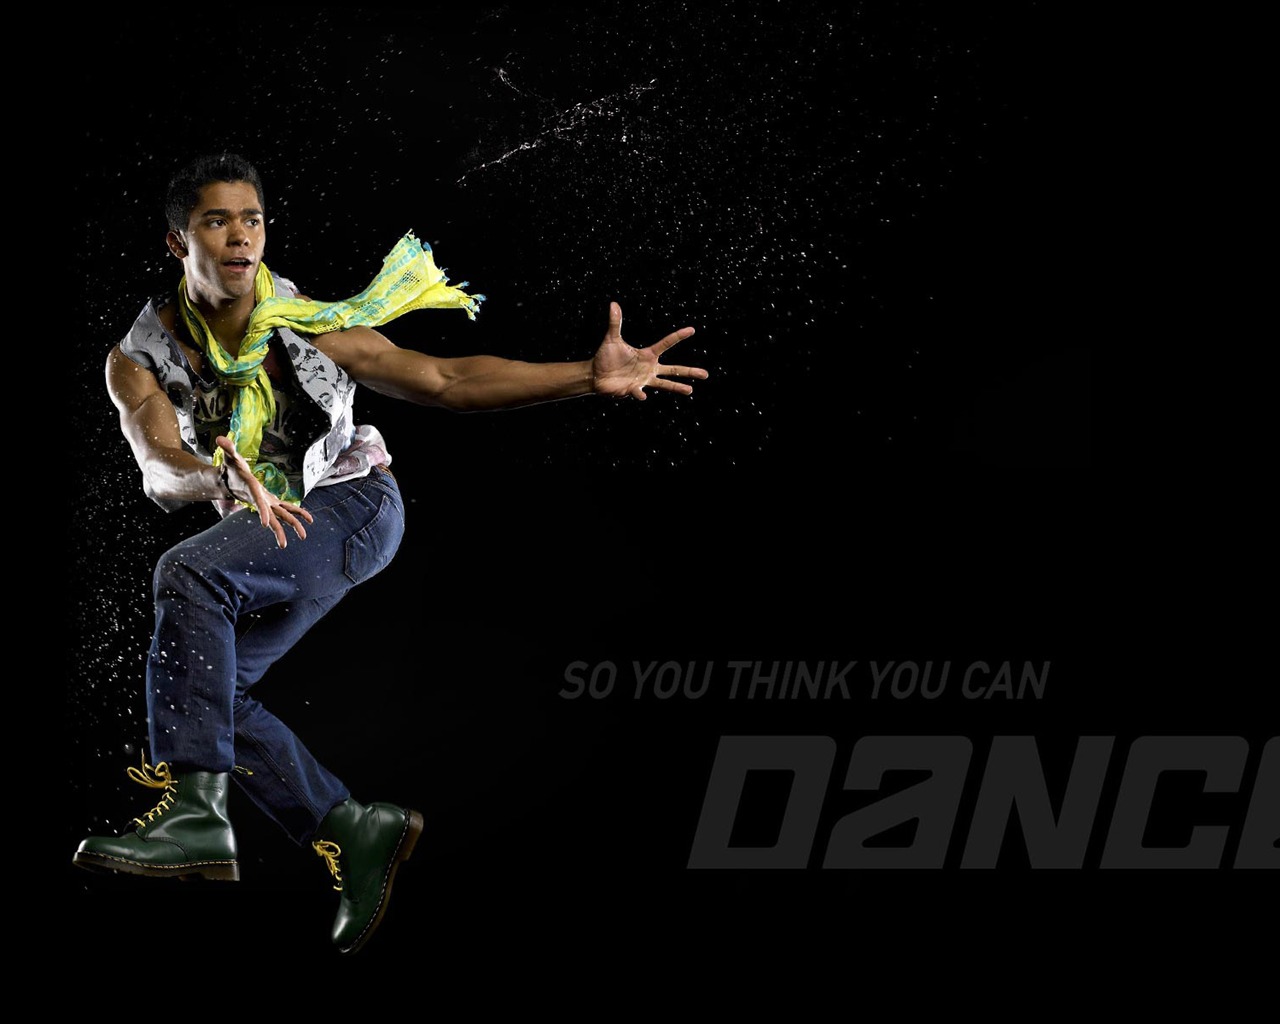 So You Think You Can Dance wallpaper (1) #2 - 1280x1024